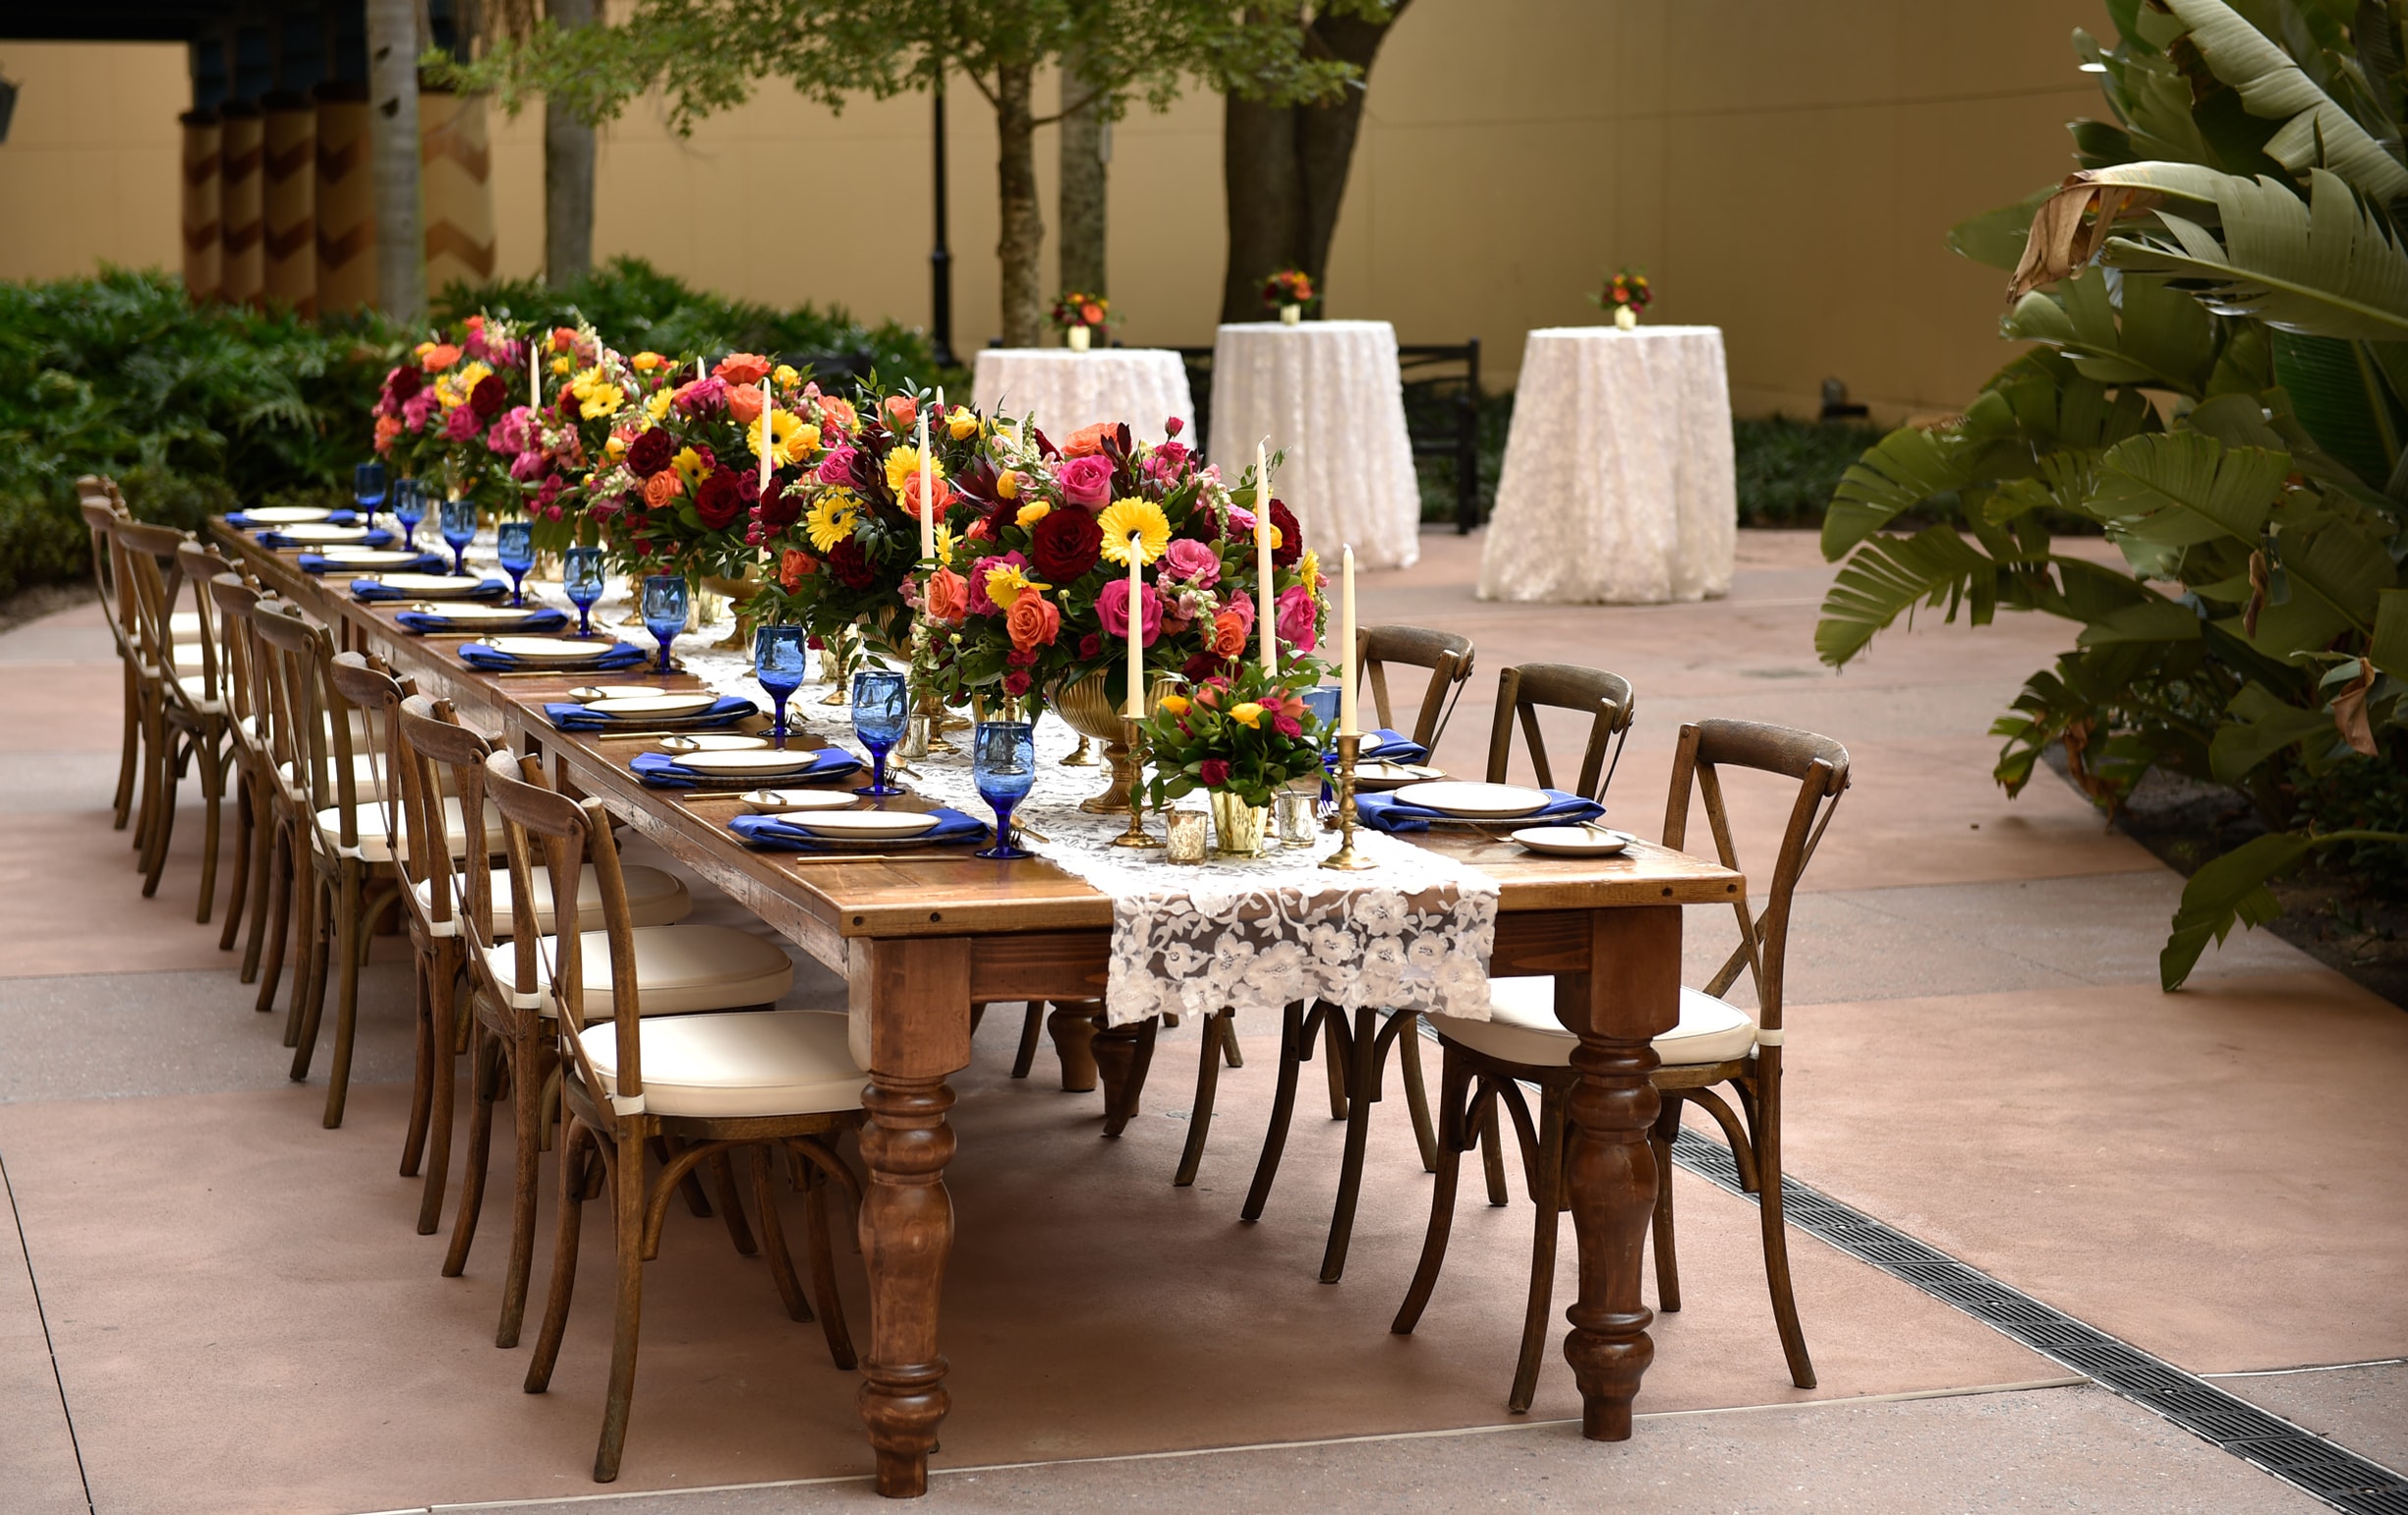 A long table with many place settings on a courtyard with 3 table tops in the background